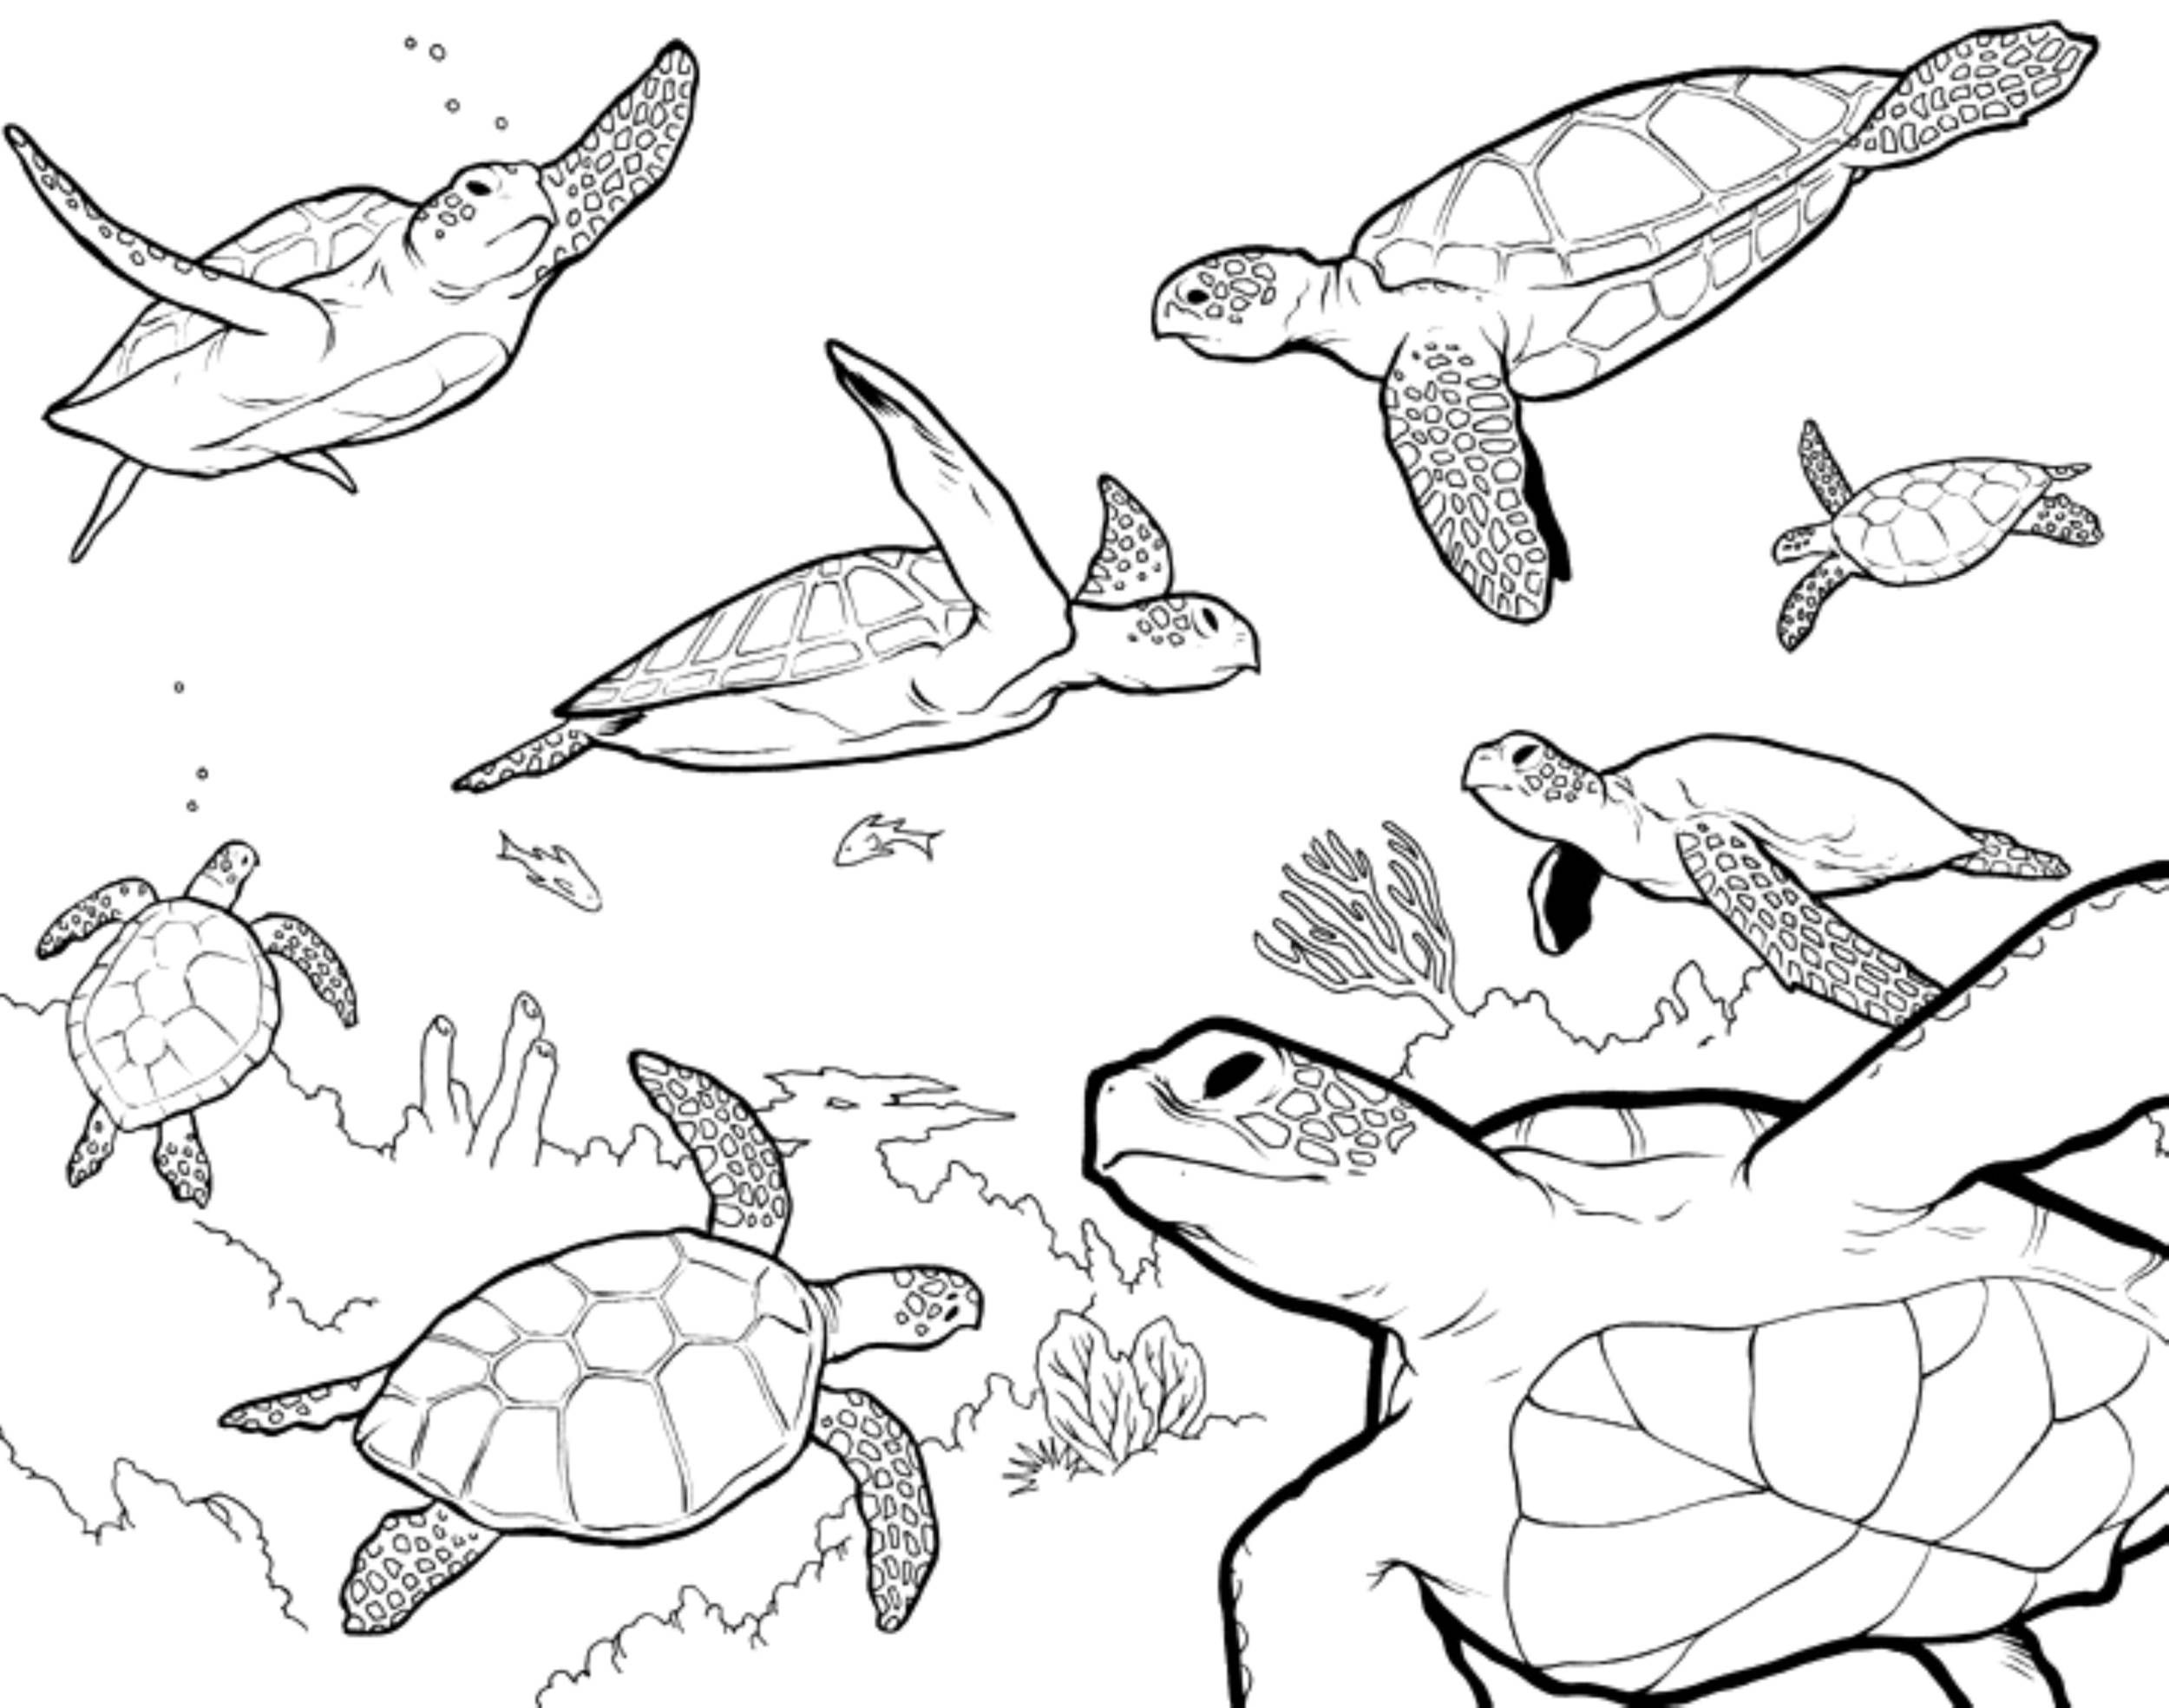 green sea turtle in mozaic coloring page. coloring page turtle ...